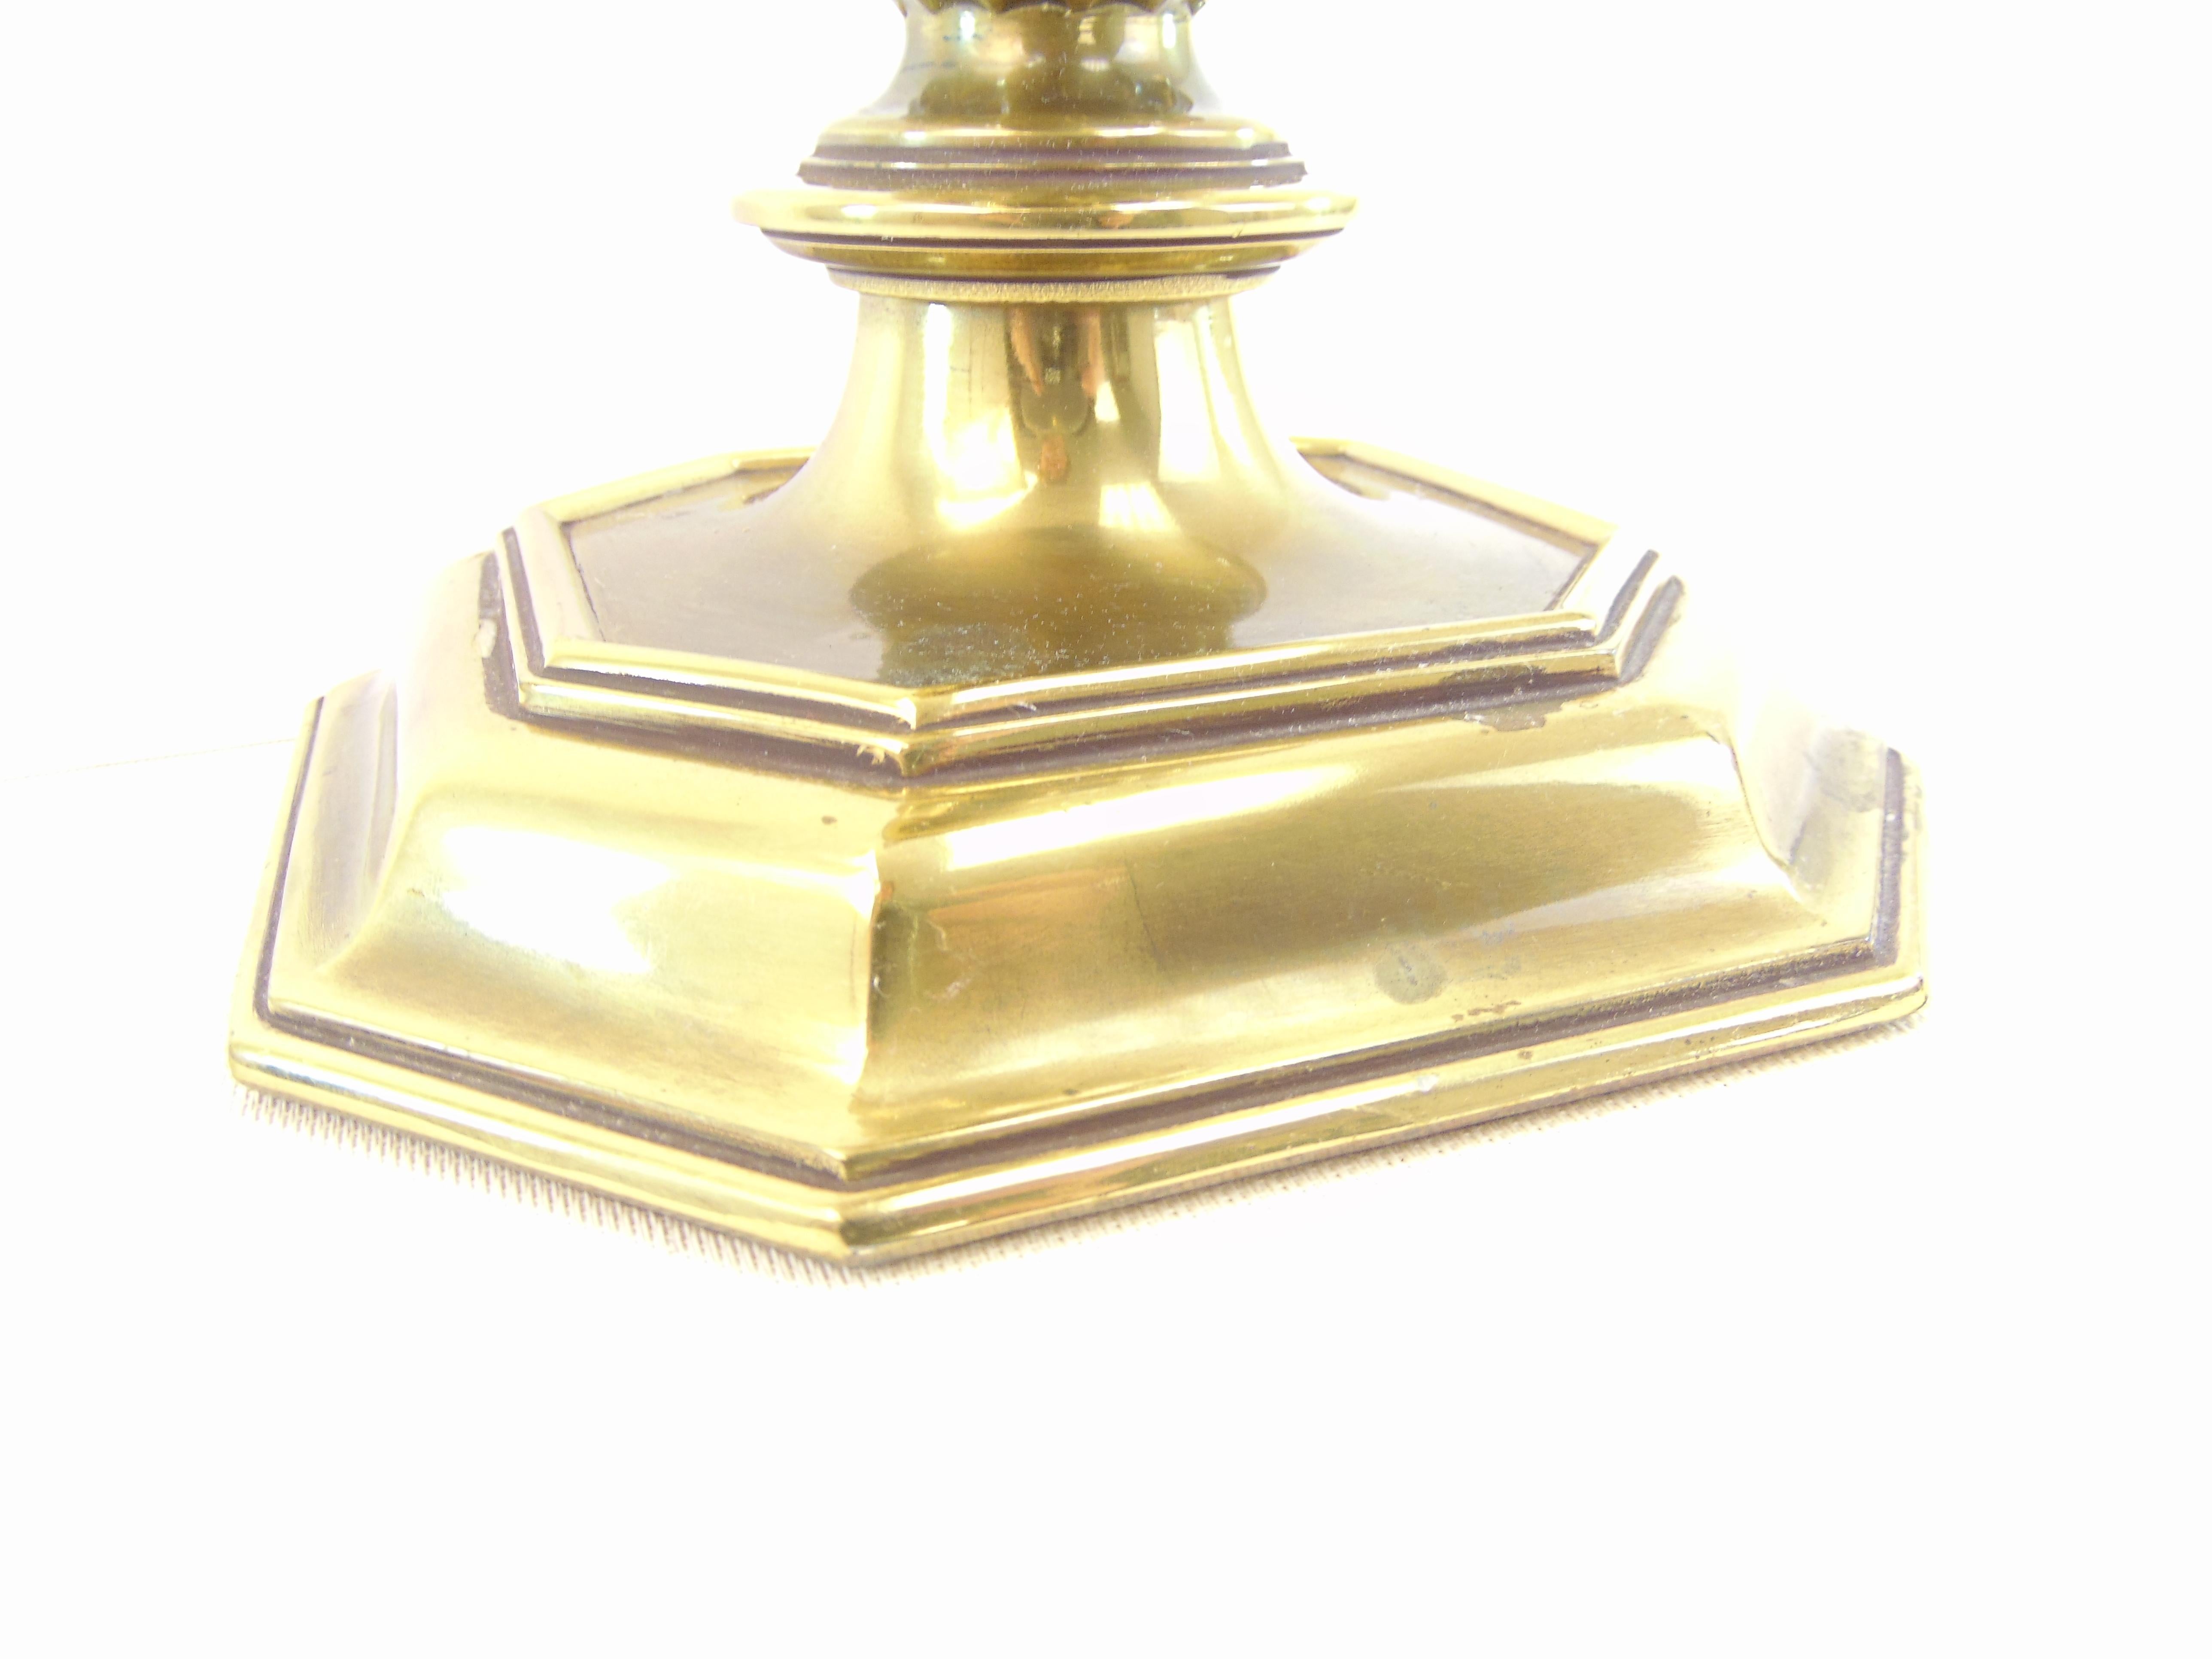 A single traditional style brass candlestick table lamp by Stiffel. The brand is stamped on the bulb socket. It is finished with the original brass finial. This lamp is a Classic American style lamp in an antique brass finish and candlestick